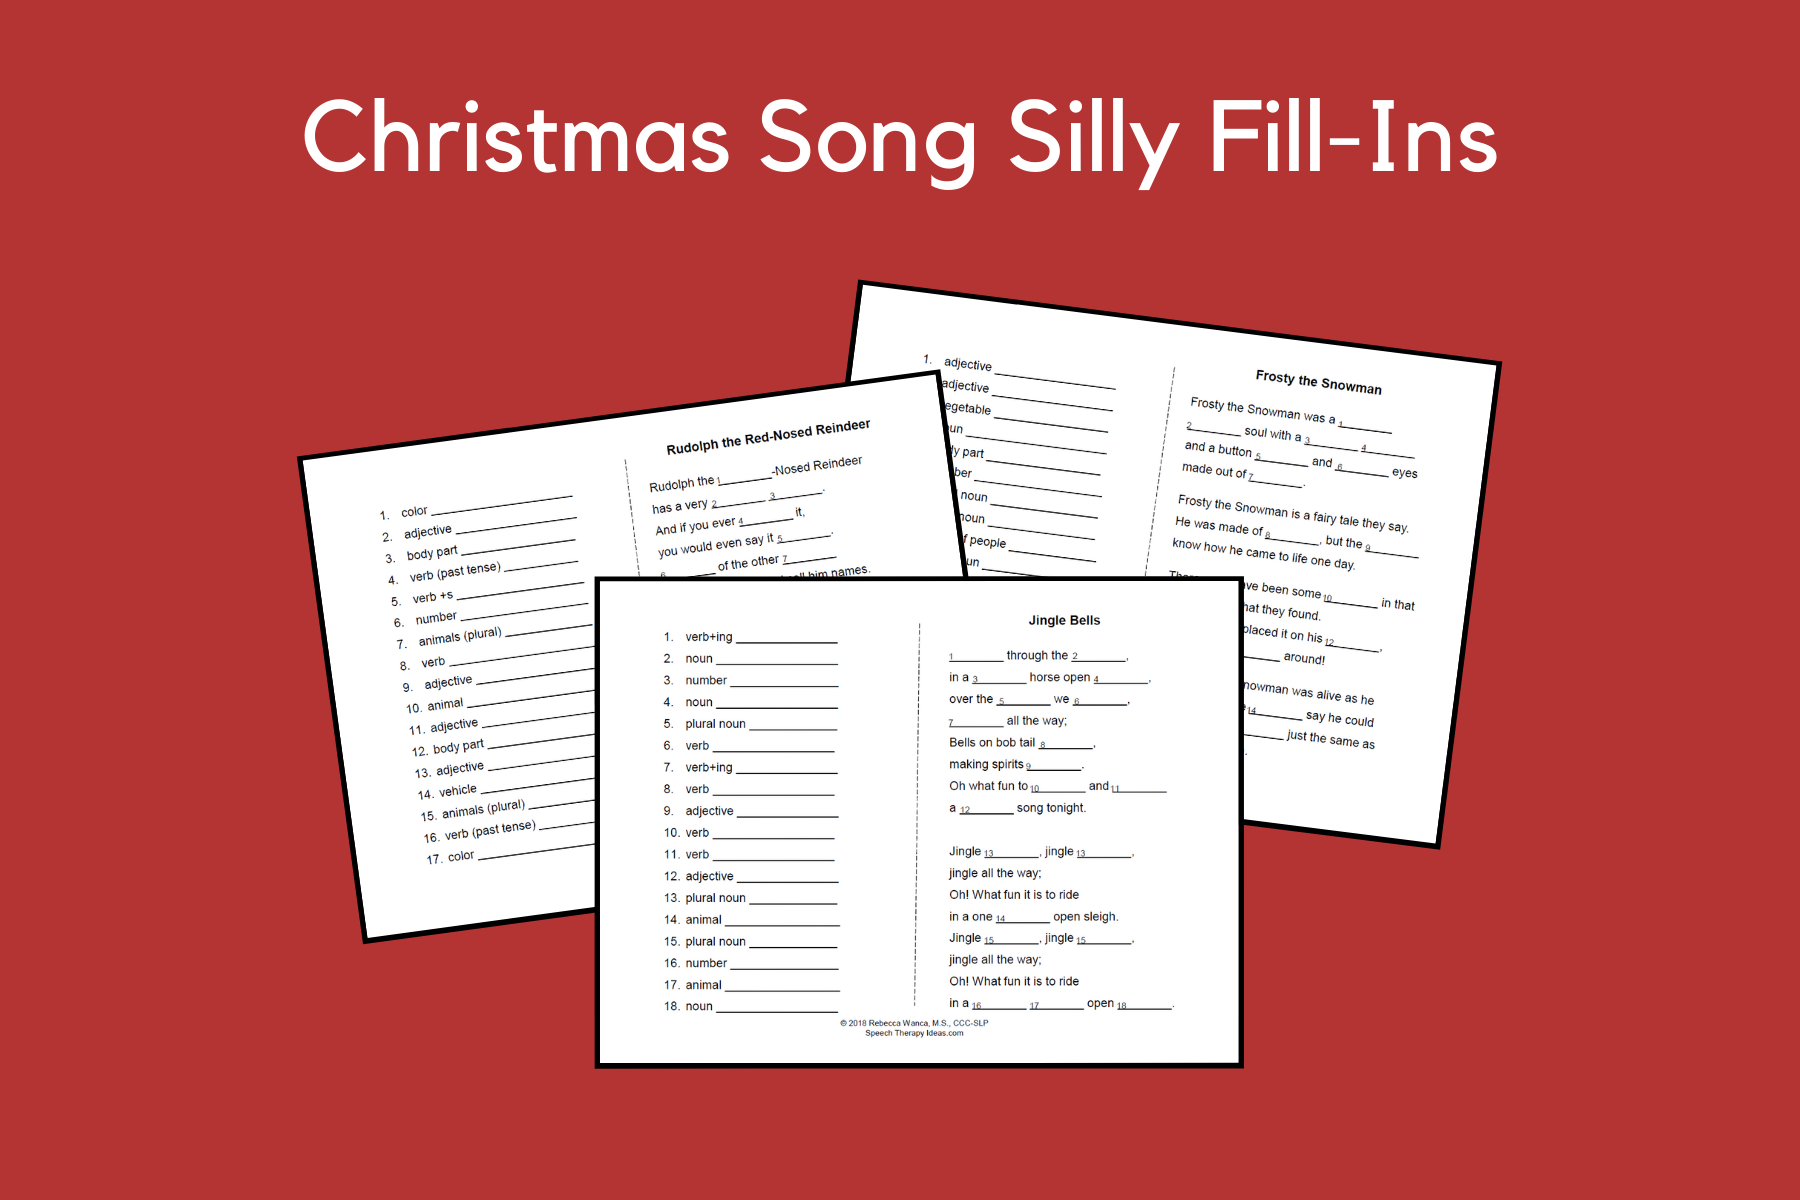 Christmas Song Silly Fill-Ins